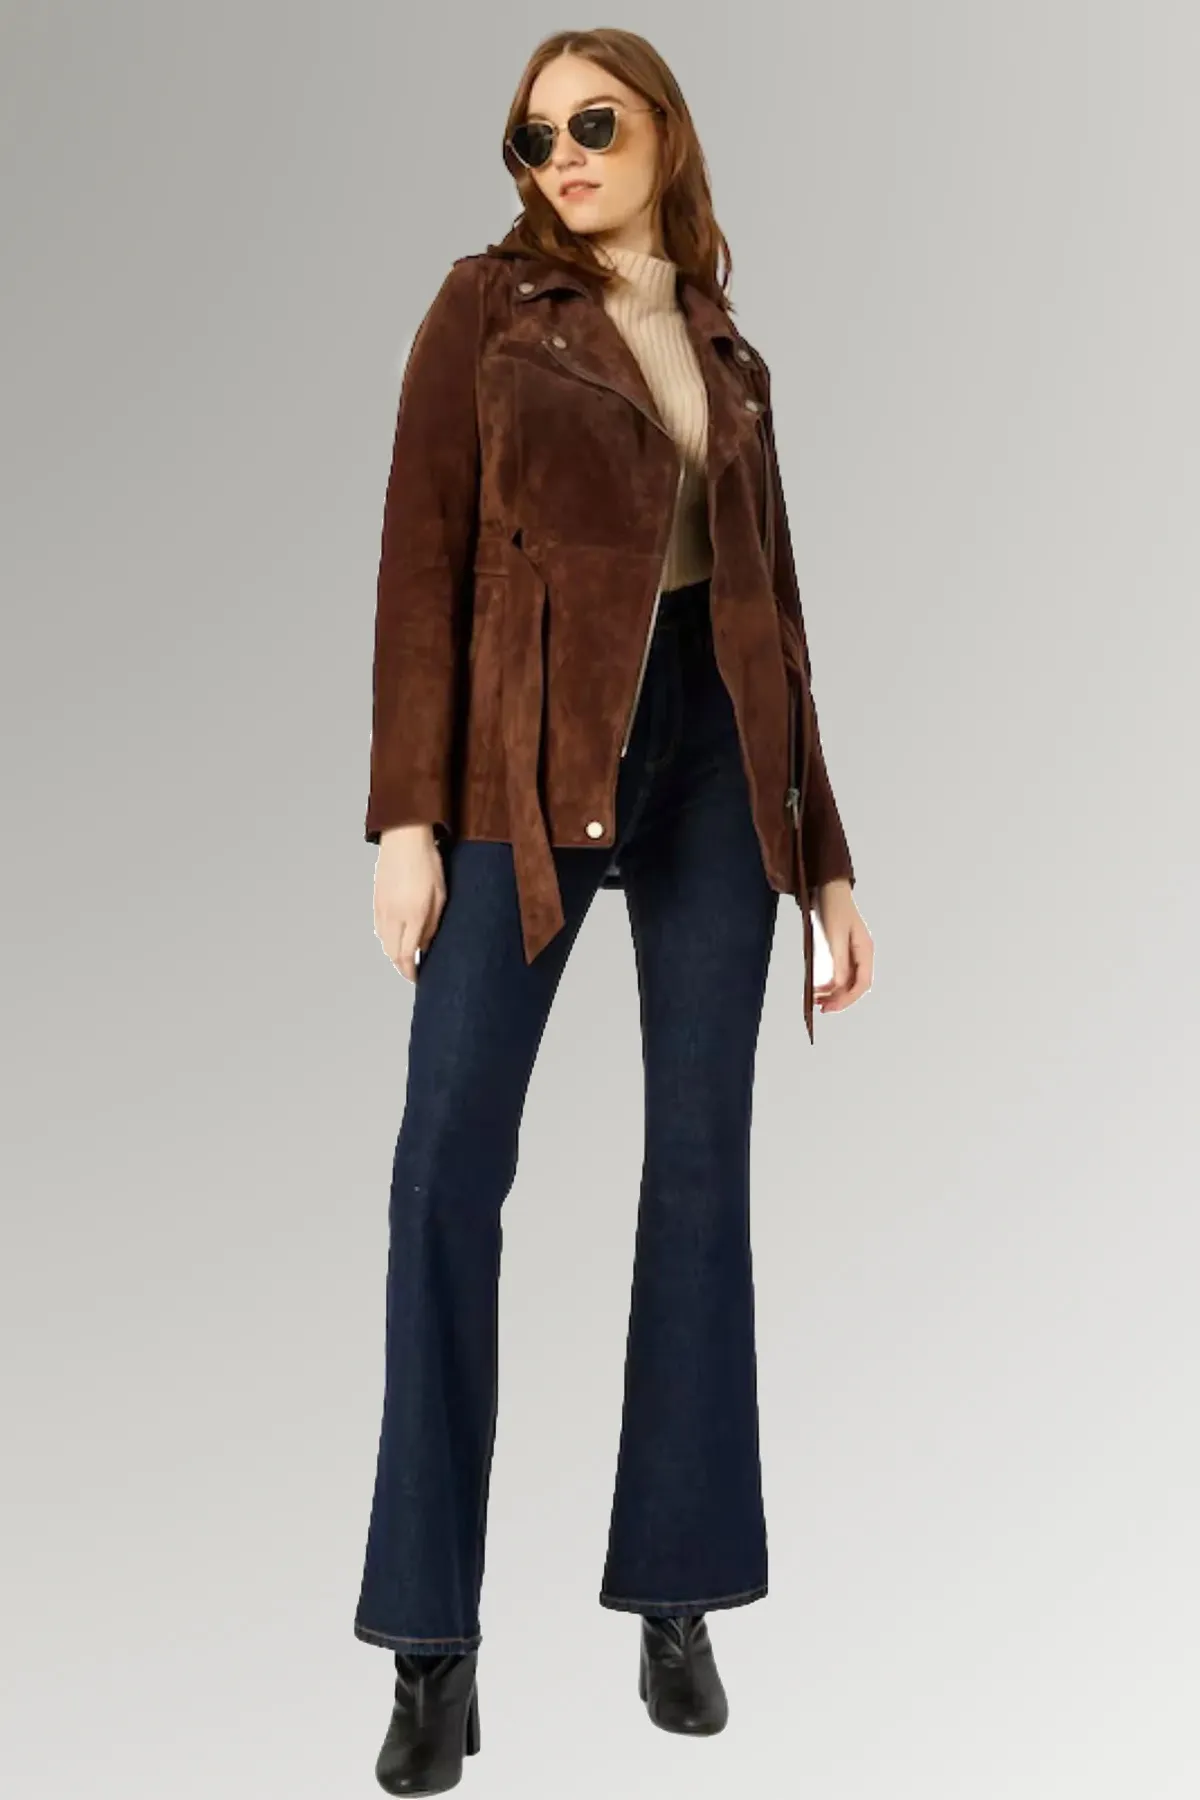 women's Brown Suede Belted Leather Coat | FREE SHIPPING